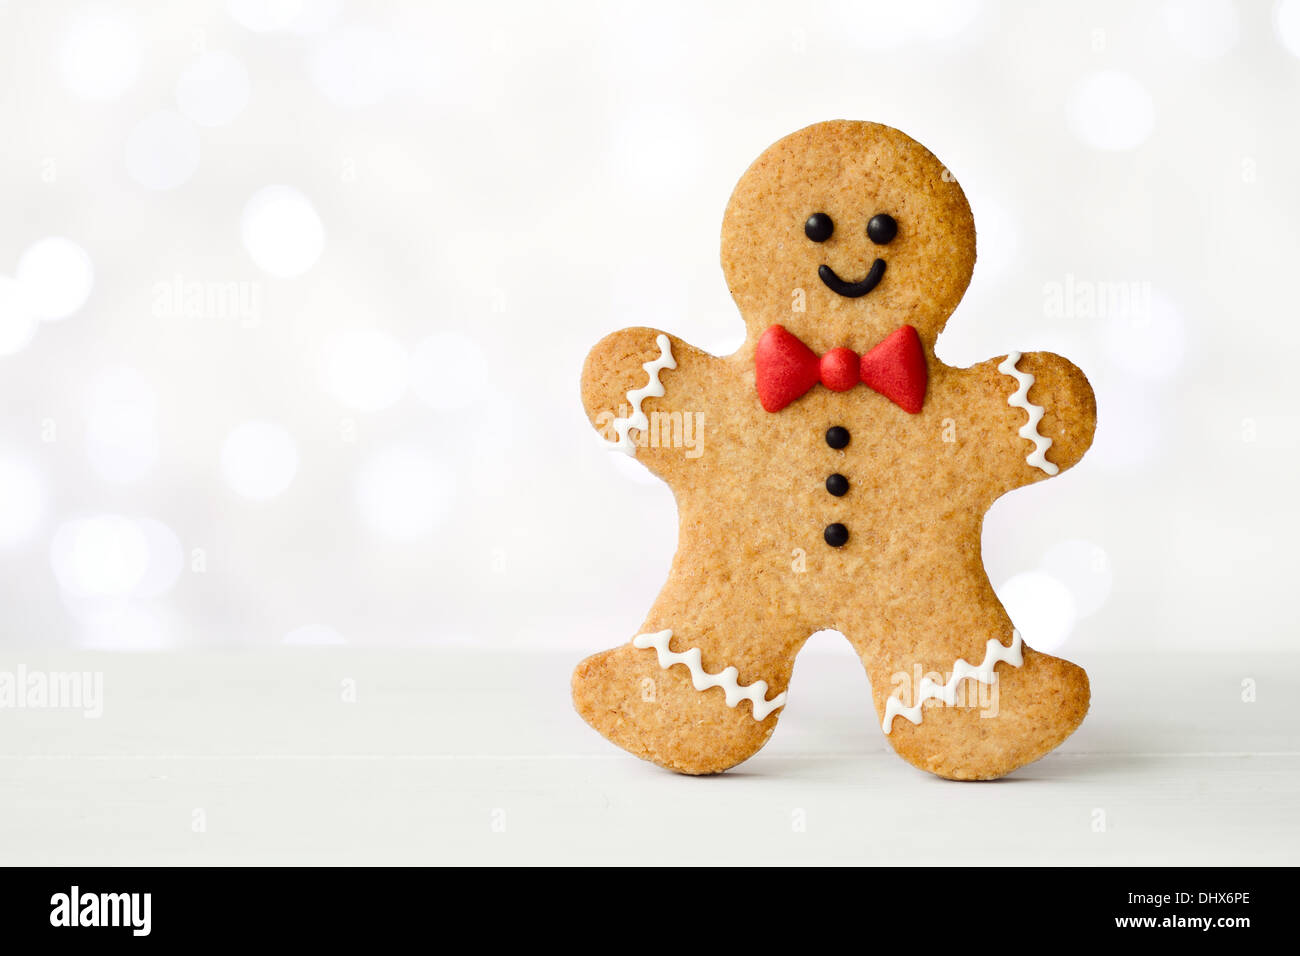 Gingerbread man with red bow tie Stock Photo